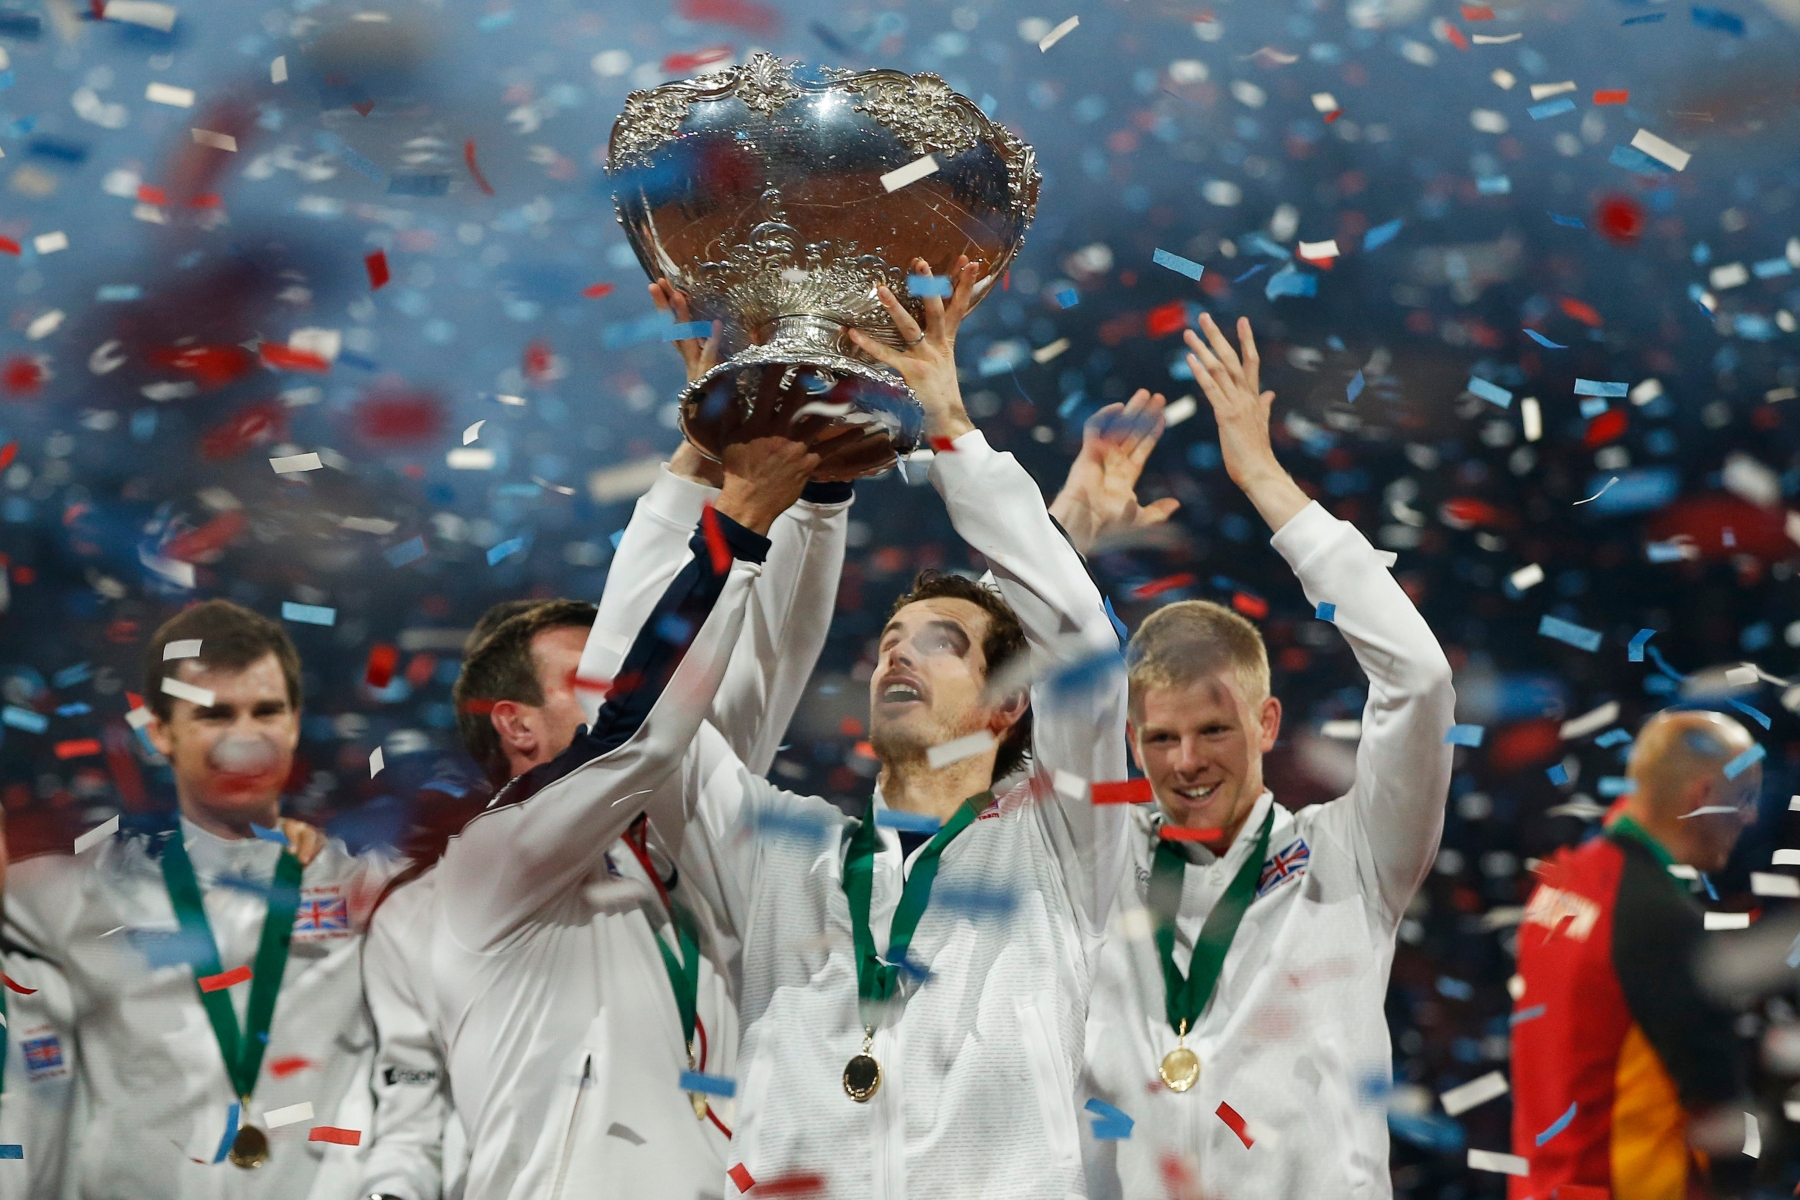 Britain's Andy Murray, center, takes over the Davis Cup from Britains captain Leon Smith, left, as the team celebrates after Andy Murray defeated Belgiums David Goffin in three sets, 6-3, 7-5, 6-3, during their singles Davis Cup final tennis match at the Flanders Expo in Ghent, Belgium, Sunday, Nov. 29, 2015. (AP Photo/Alastair Grant) APTOPIX Belgium Britain Davis Cup Final Tennis